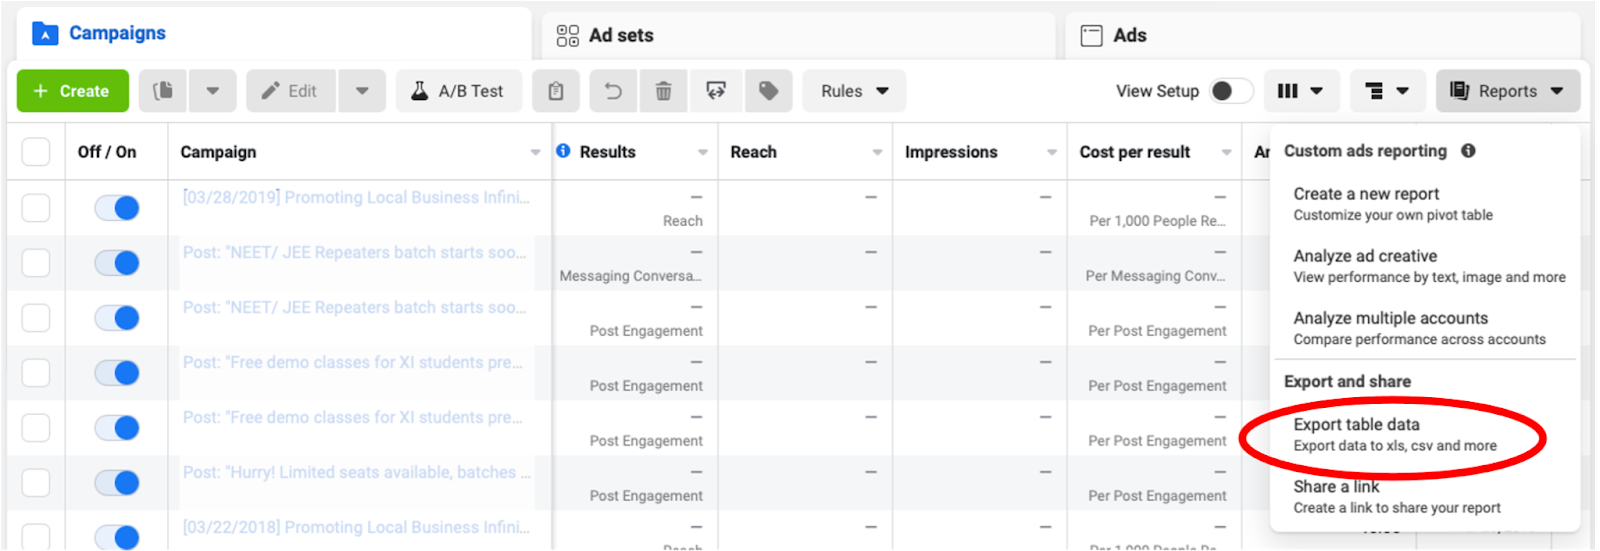 Upload data manually from Facebook ads to BigQuery: step 1